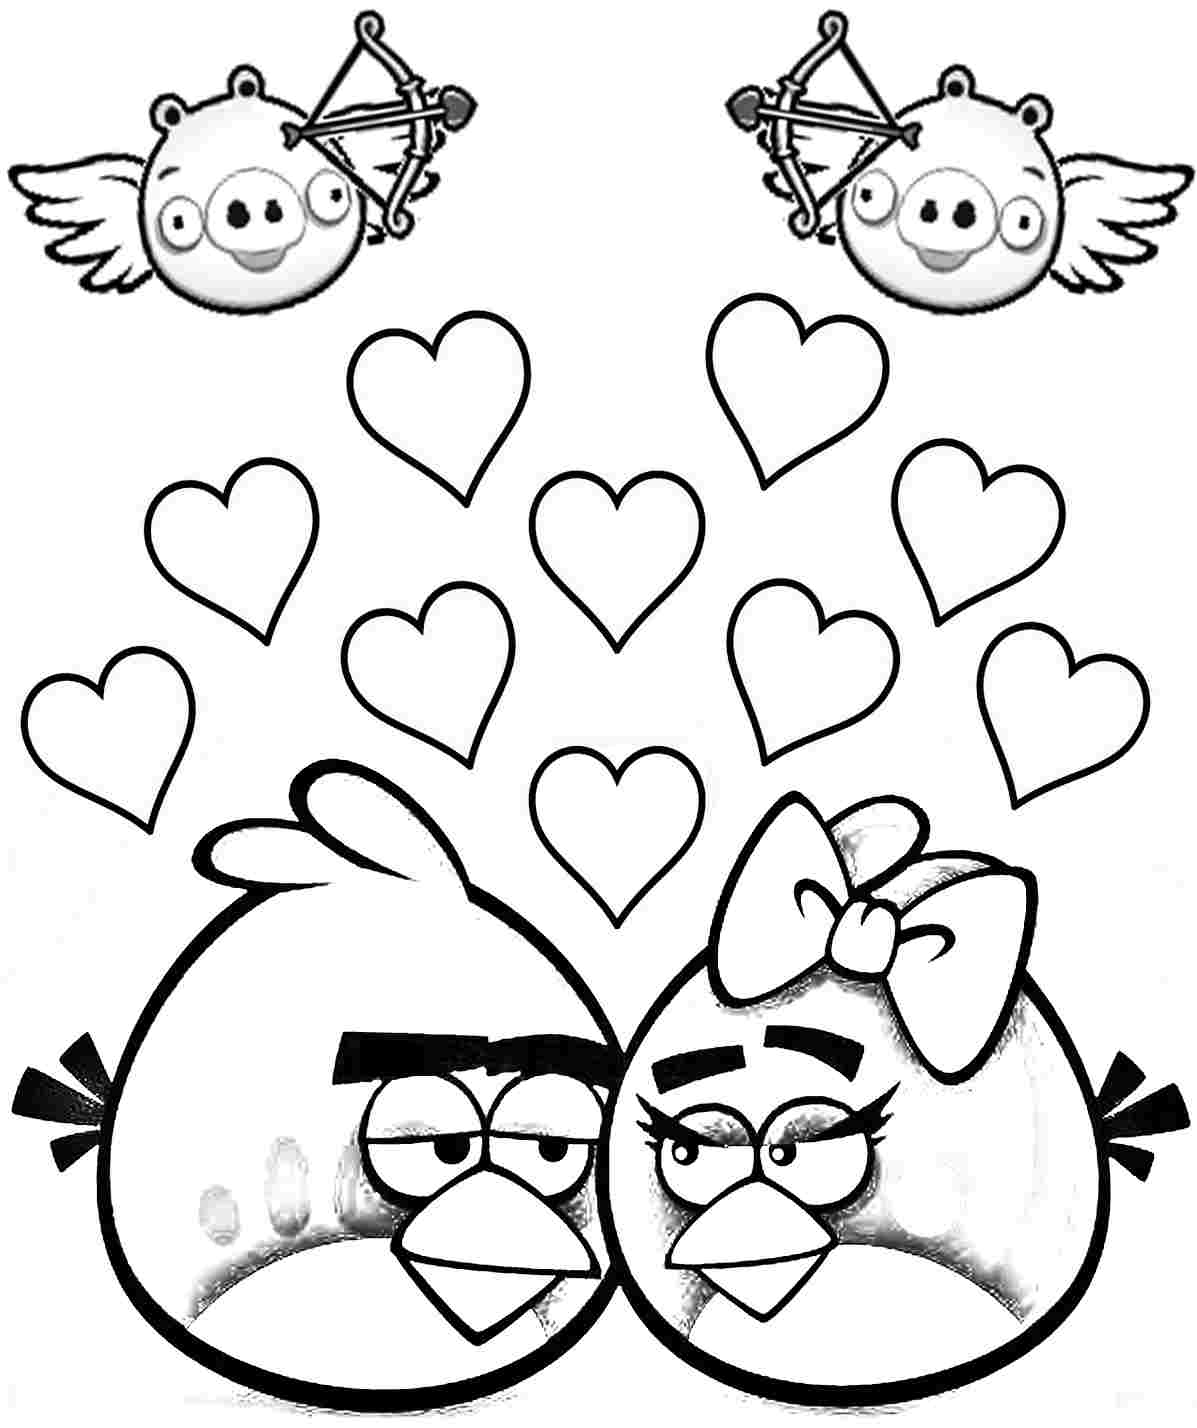 Valentines Day Coloring Pages For Boys at GetColorings.com | Free